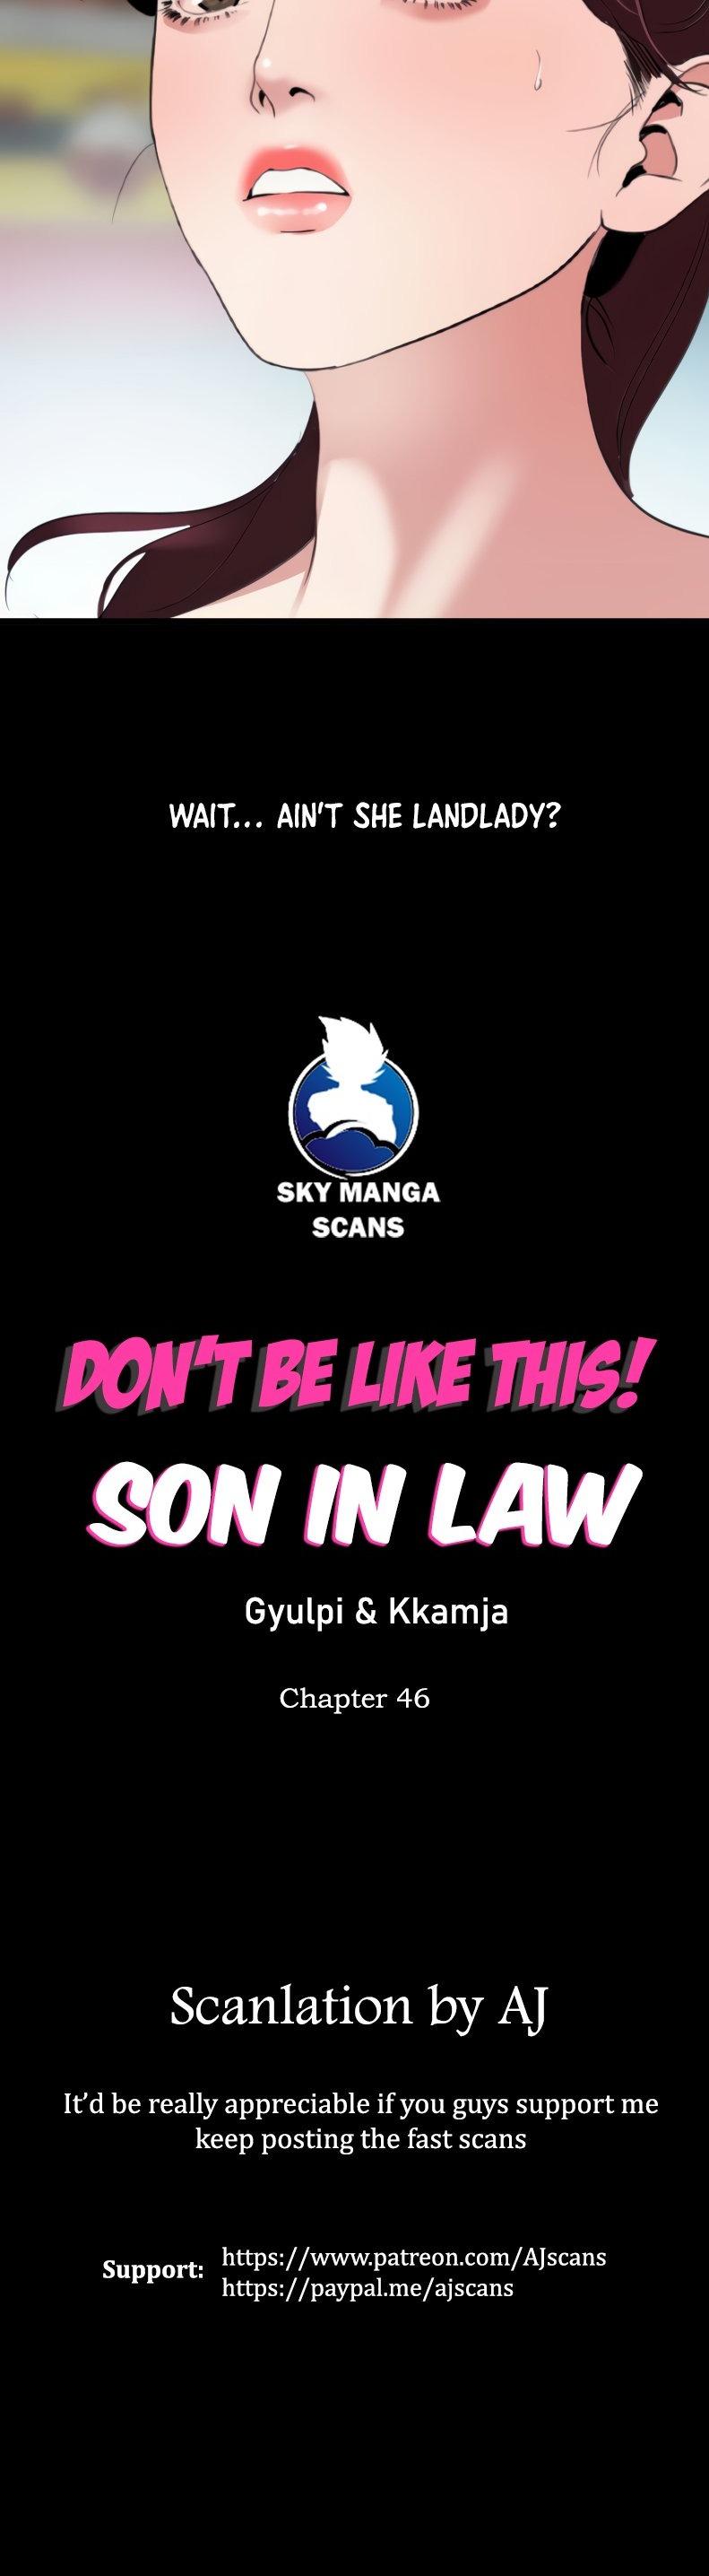 [Kkamja] Don't be like this son-in-law [English] 412